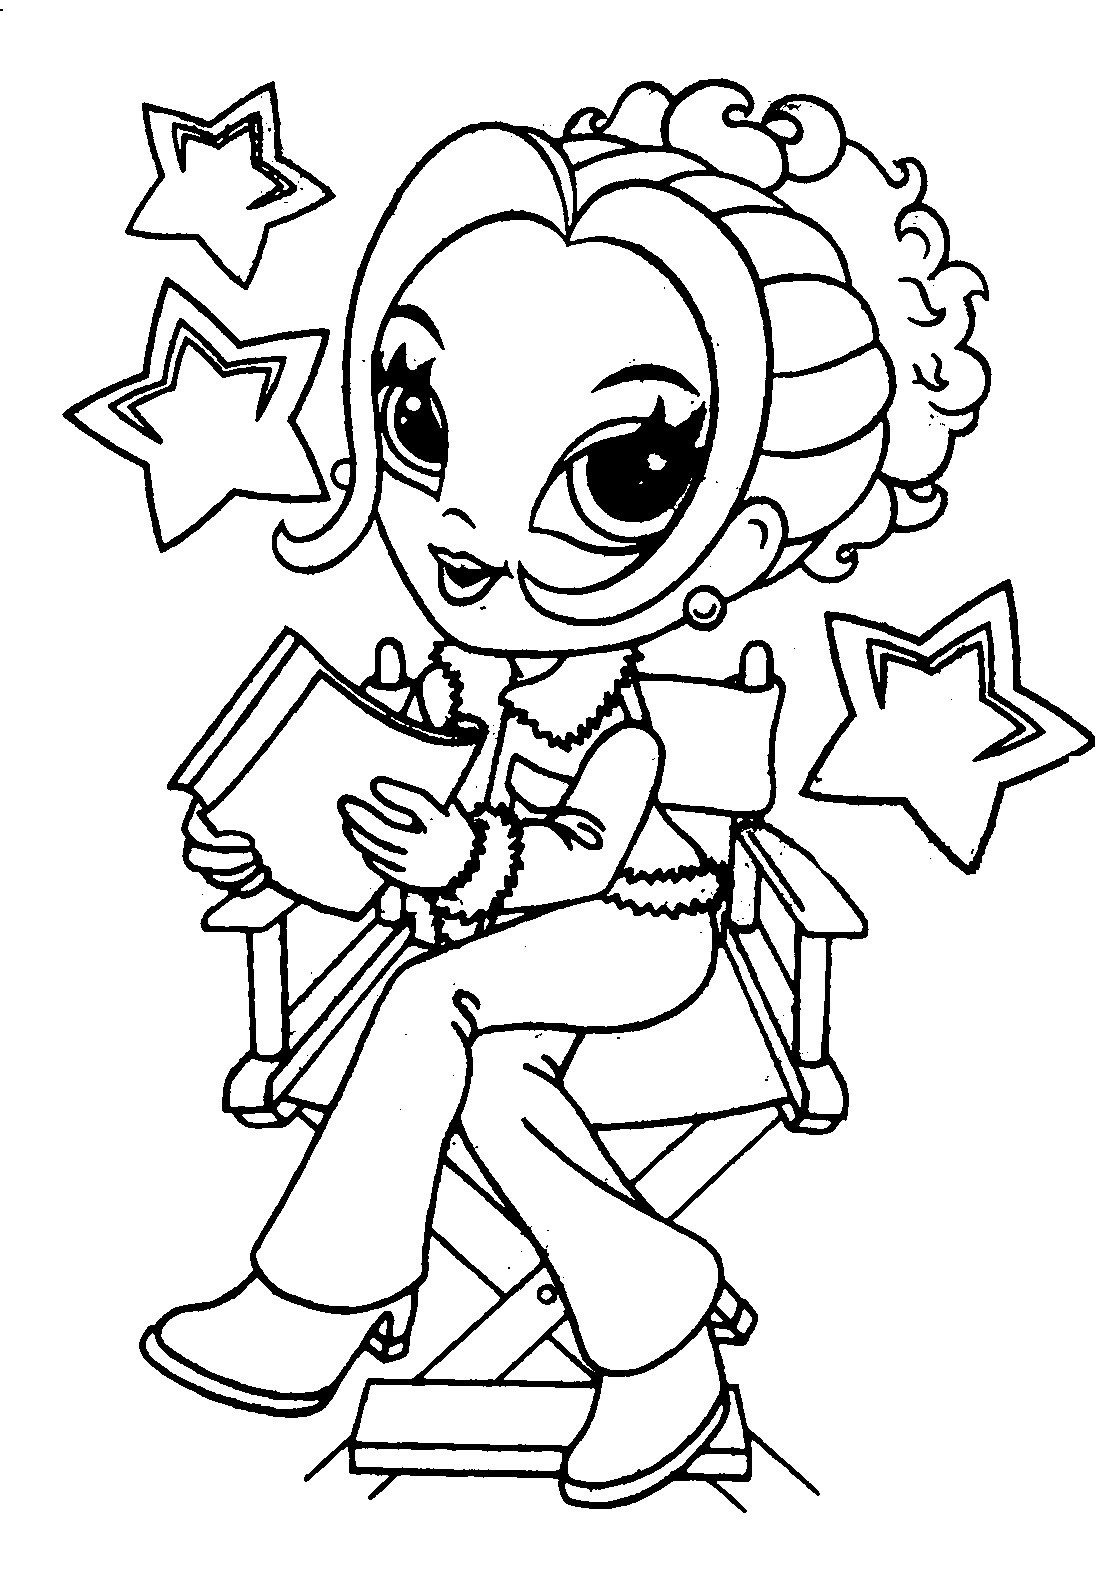 Coloring Sheets For Girls
 Girls coloring pages